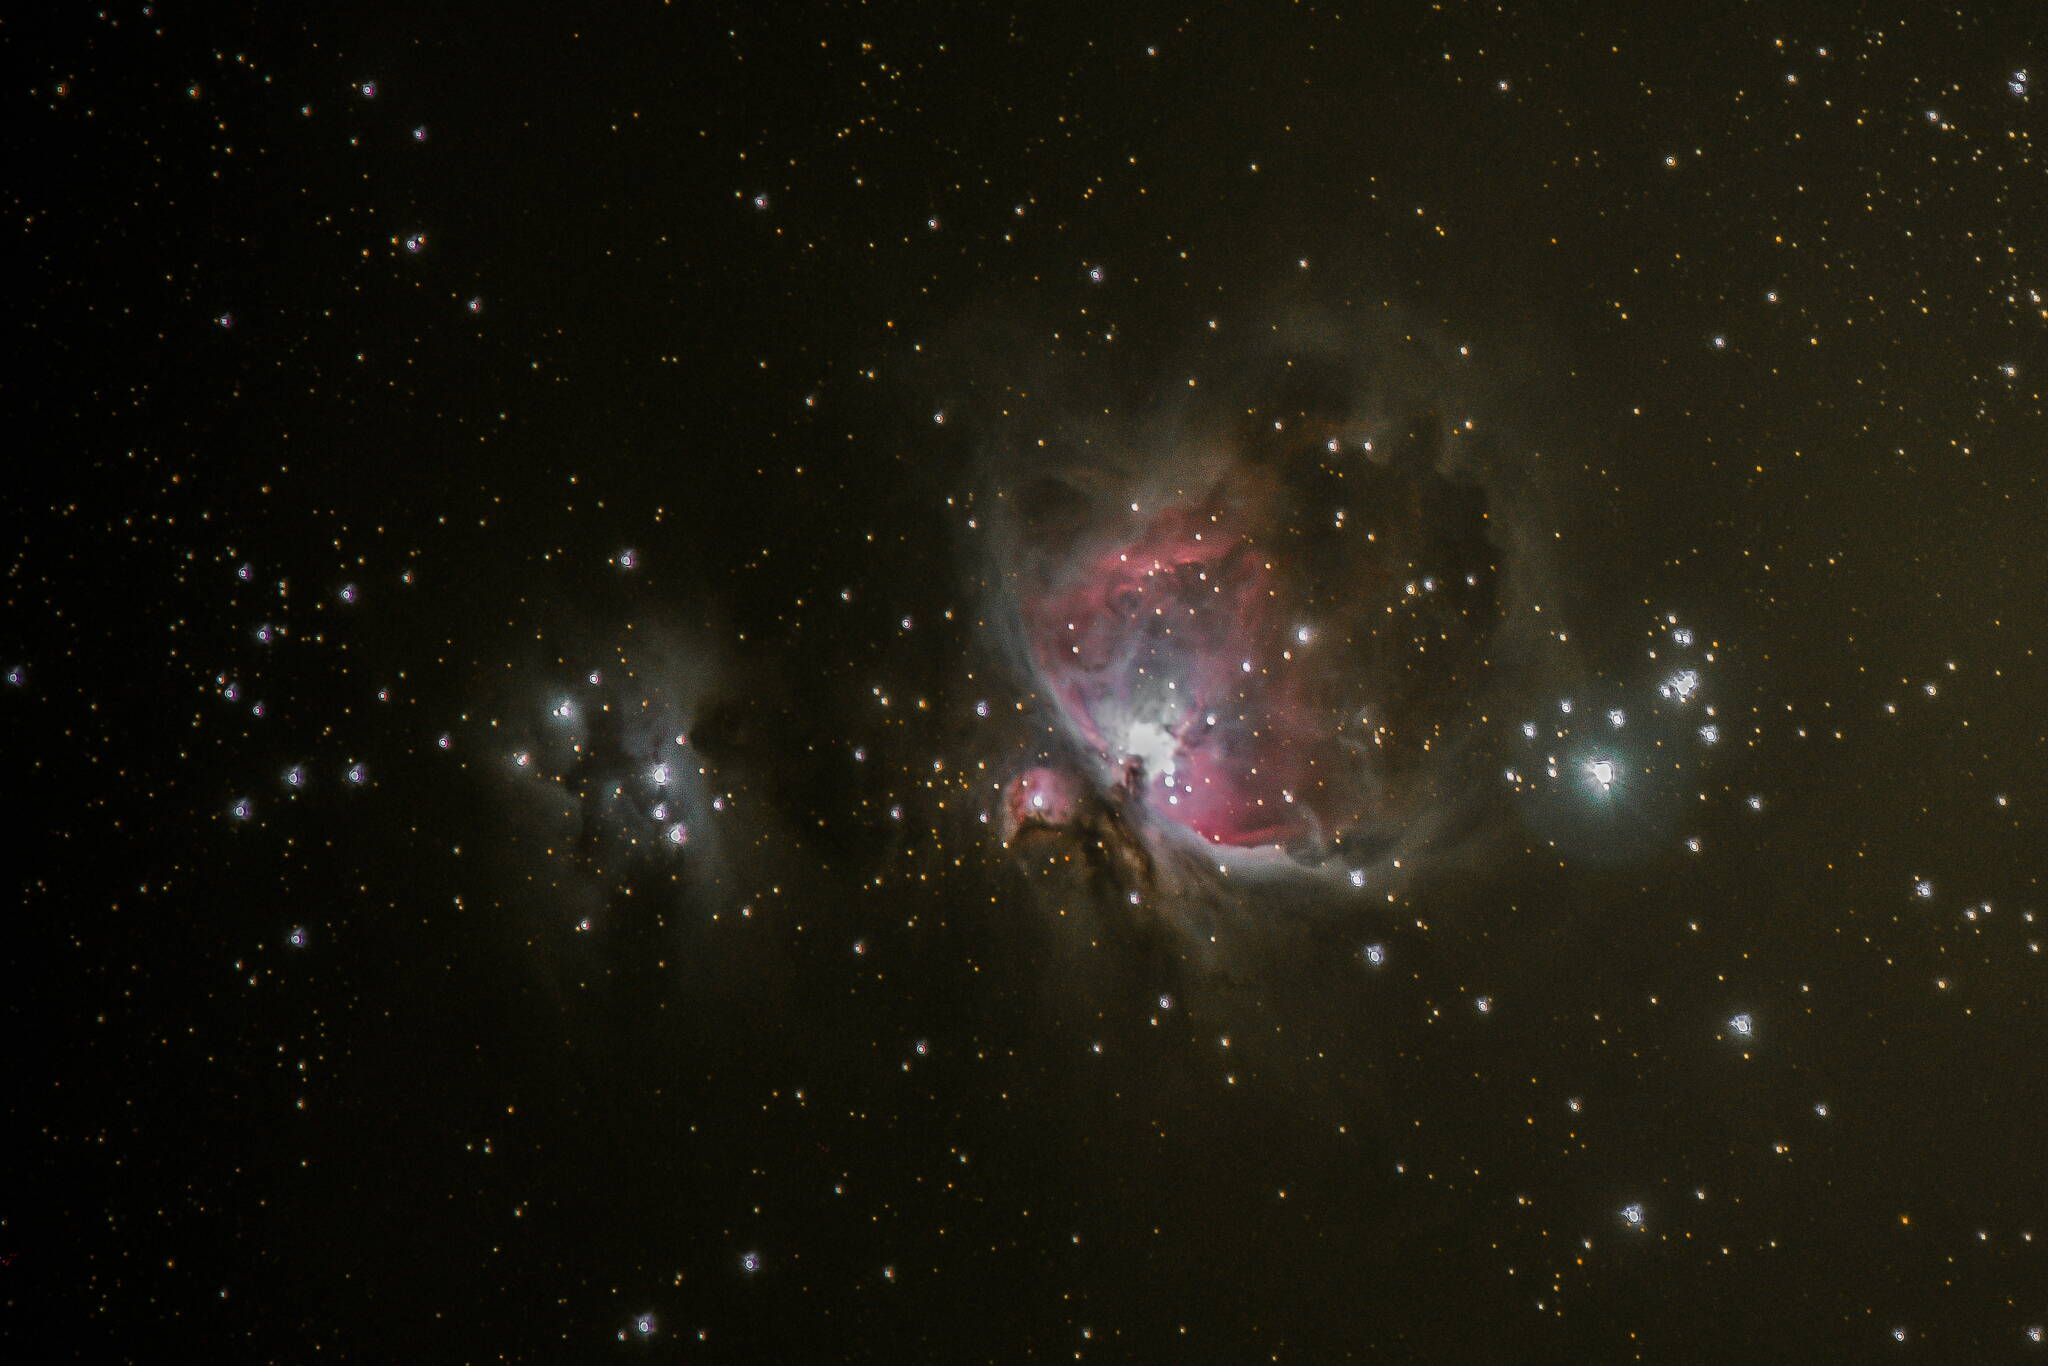 The Orion Nebula as seen from Auke Bay on Oct. 26. Taken with a DSLR camera and a 300mm telephoto lens on a tracking device for timed exposures. Multiple 25-second exposures were taken and then stacked to gain more detail. (Photo by Mark Schwan)